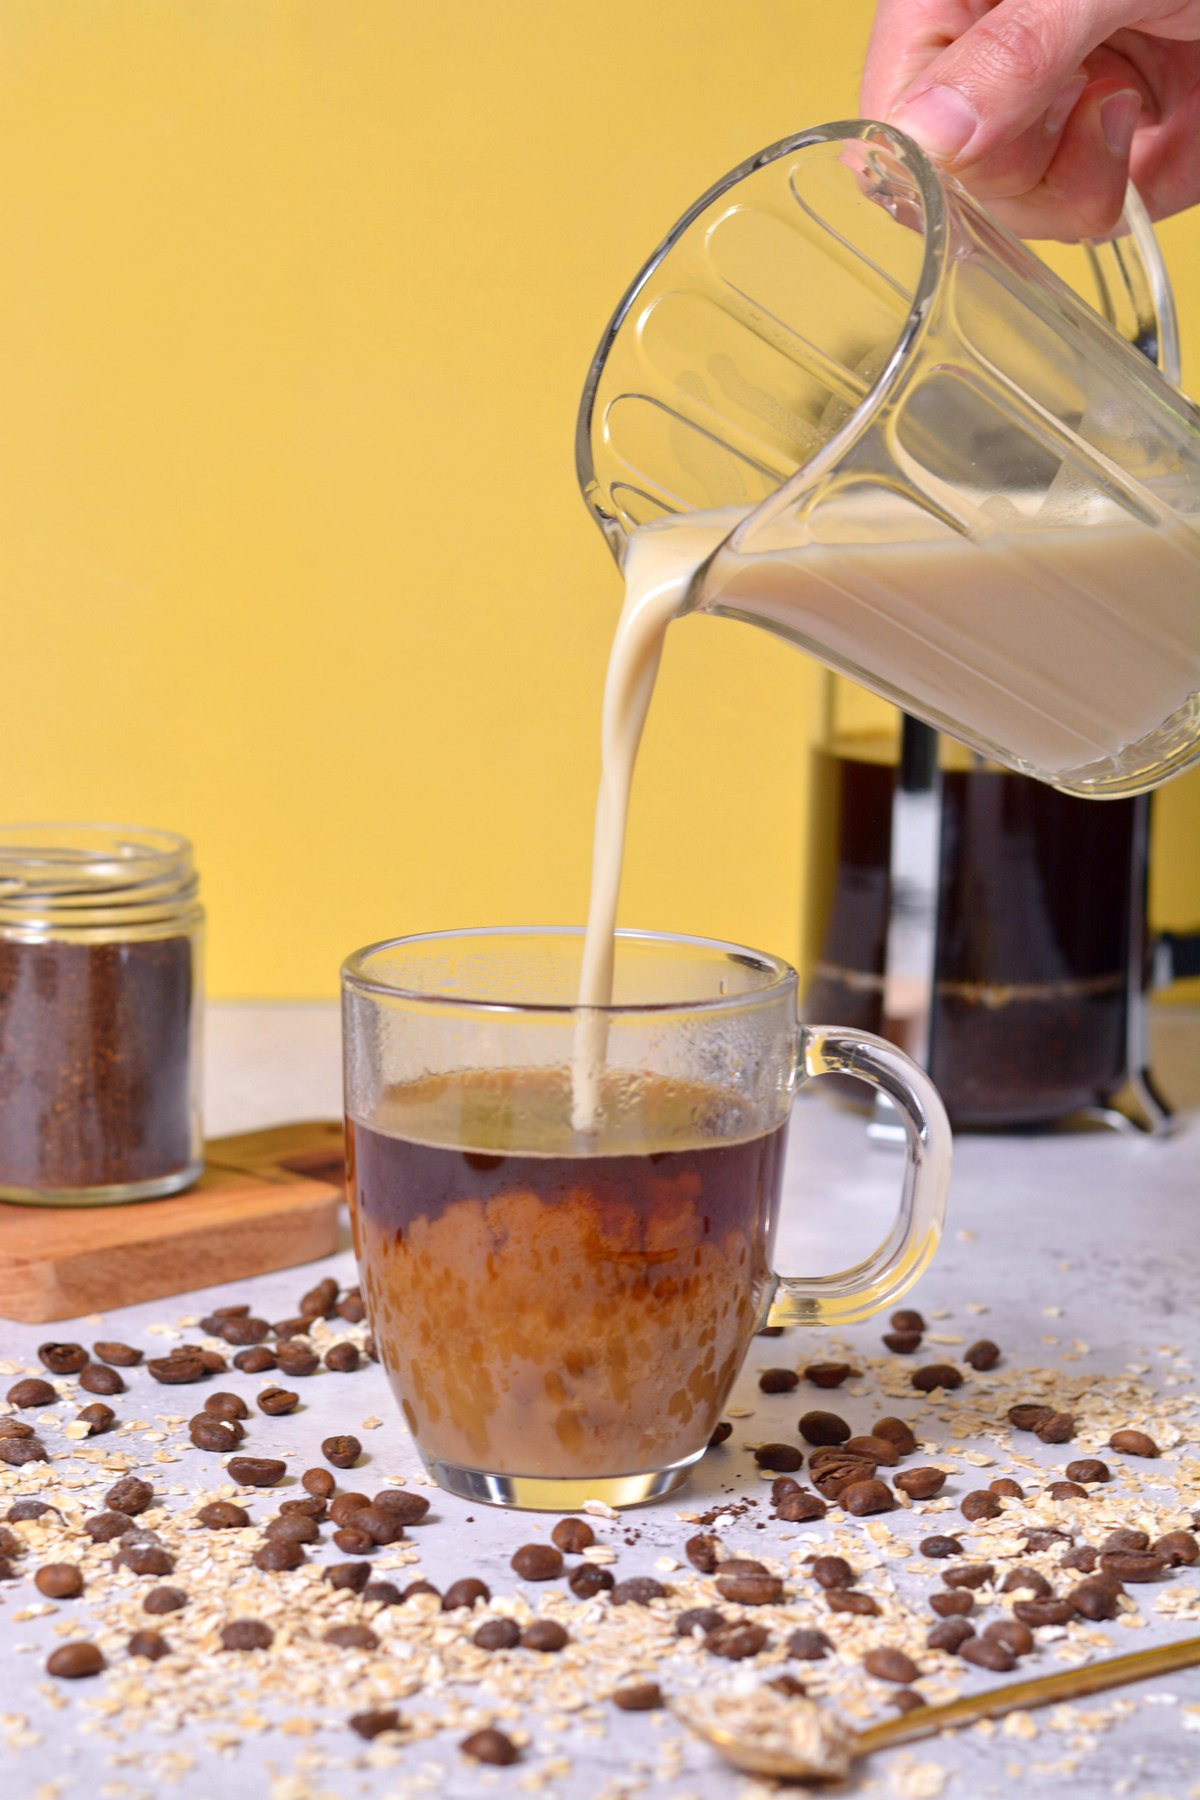 Pouring oat milk into a glass mug of coffee.